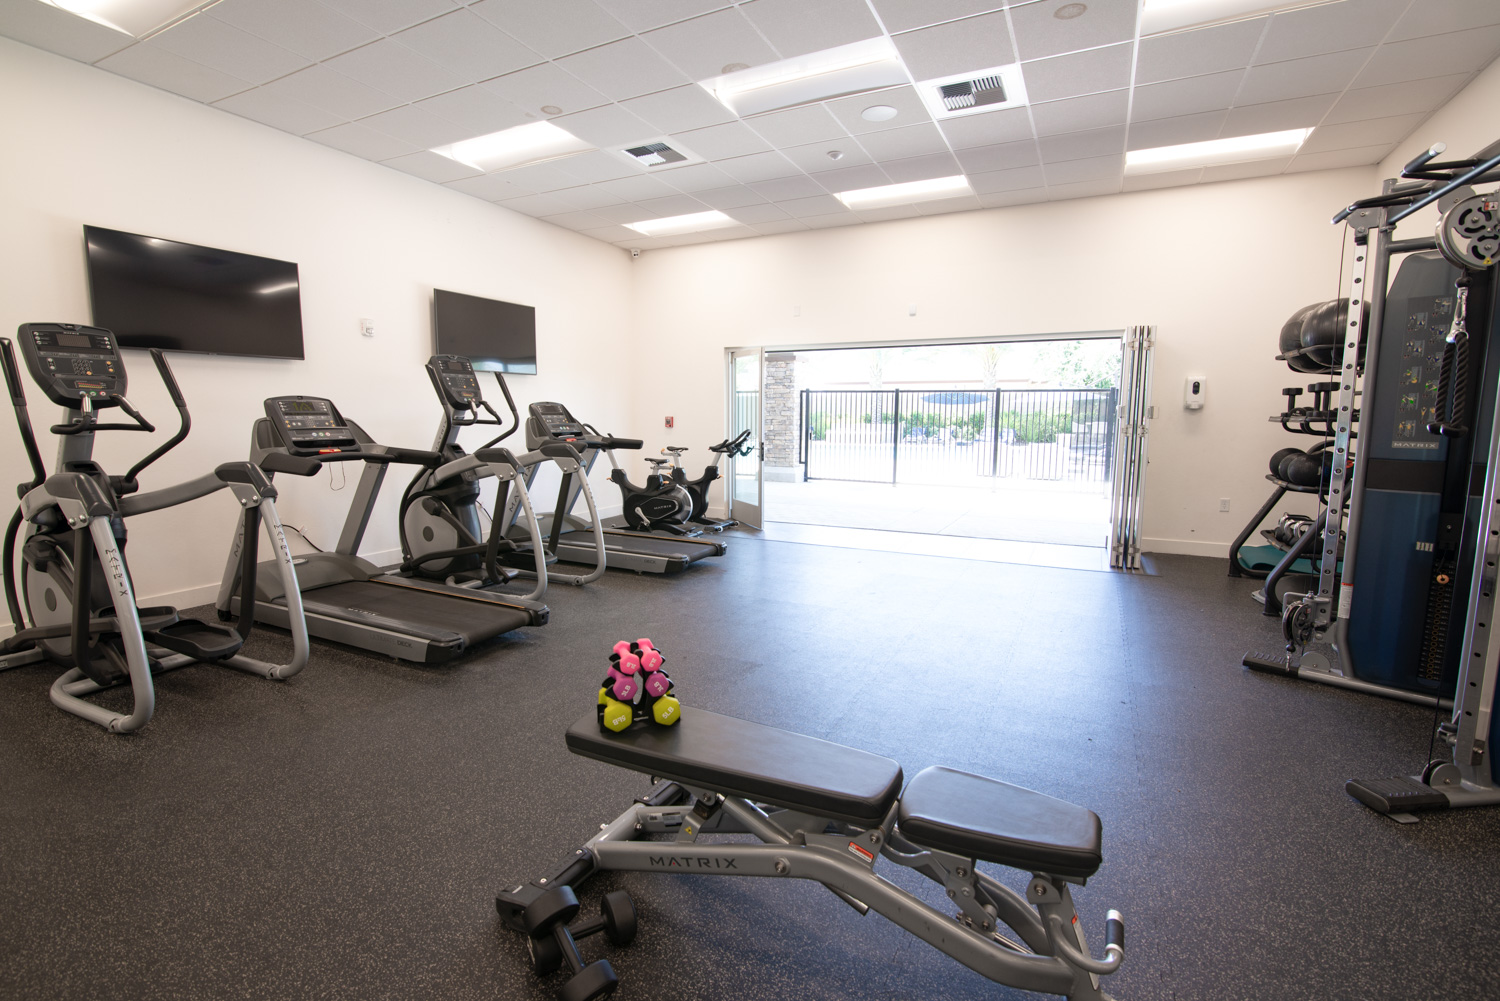 Before image of a high-end fitness center equipped with top-notch workout machines. Although the space is designed for an optimal exercise experience, the photo&#039;s colors are not accurately represented, and the view from the expansive window wall is obscured, diminishing the visual appeal of the setting.